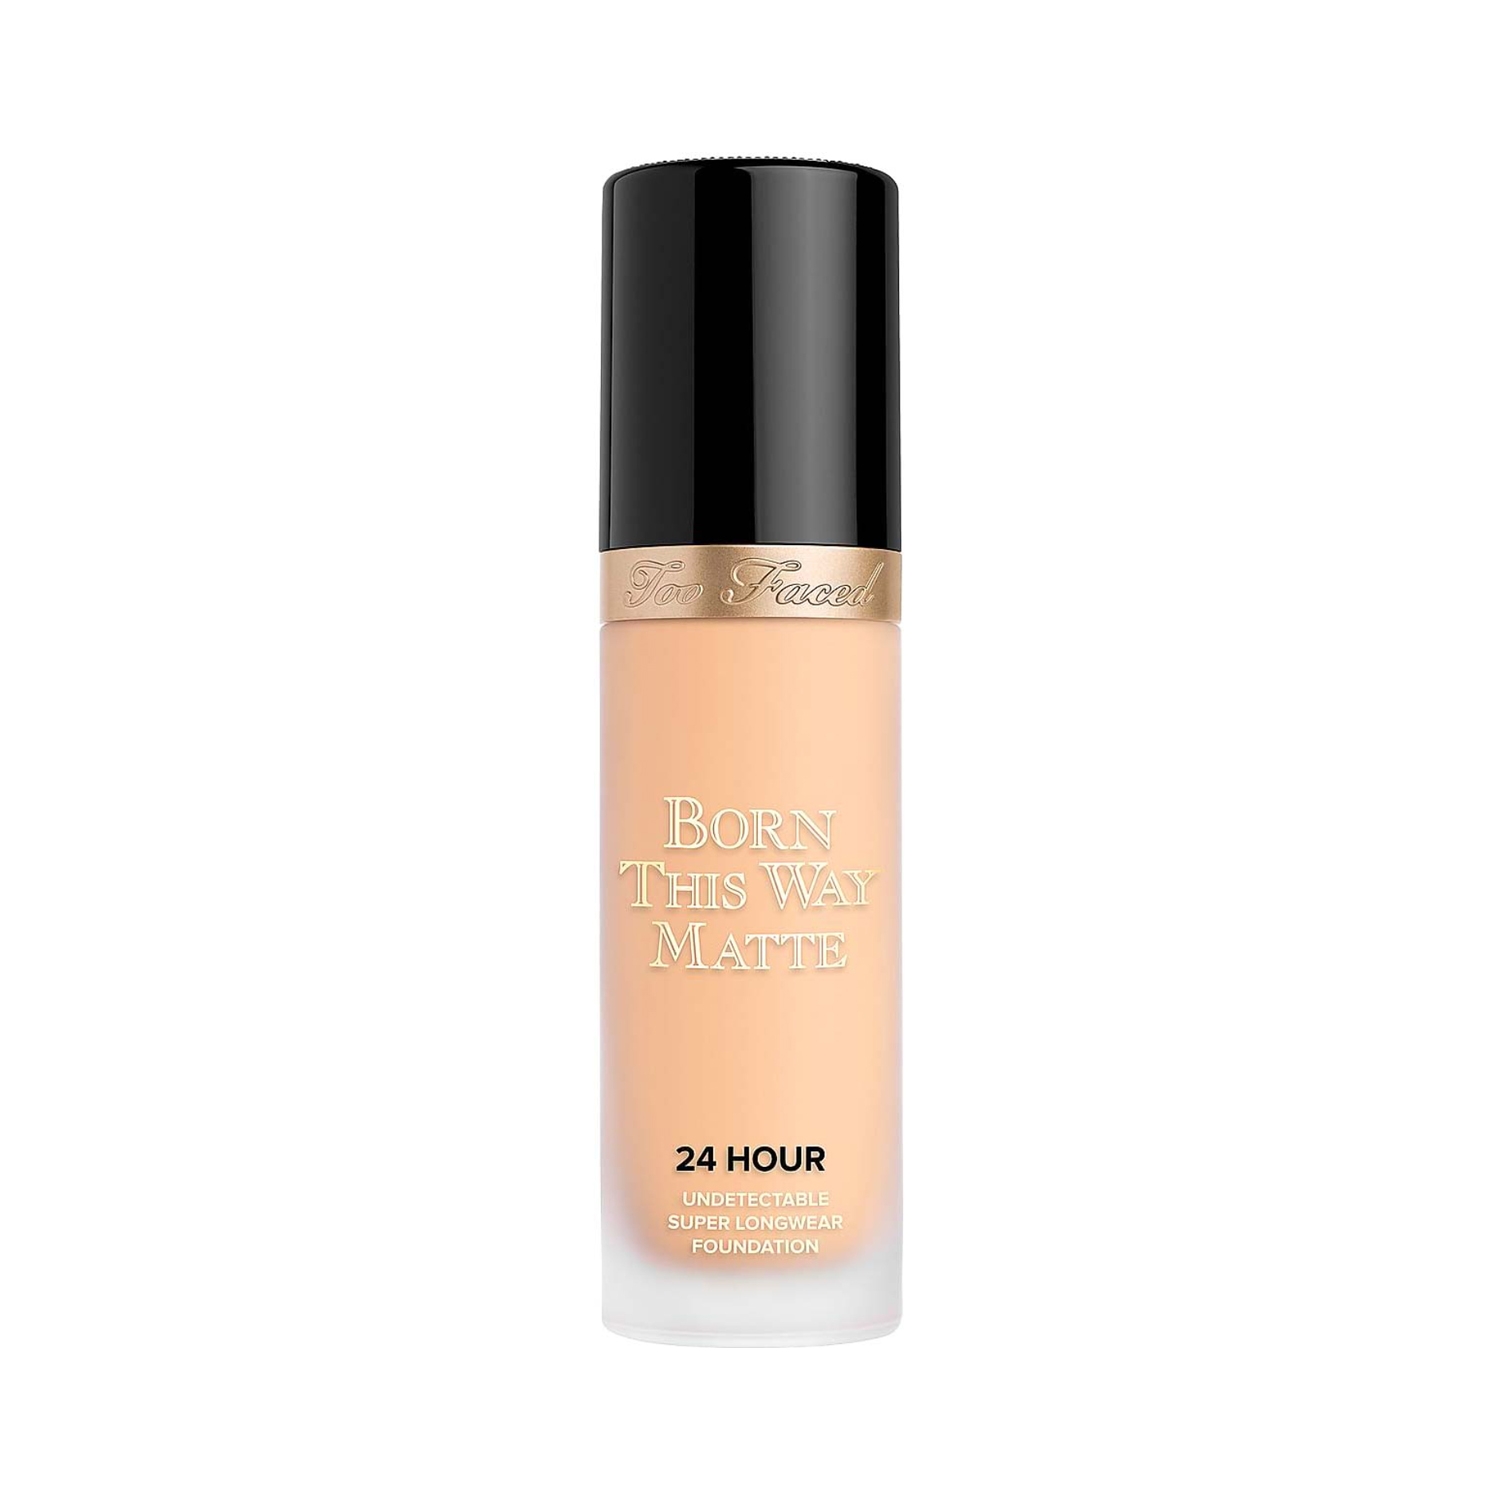 Too Faced Born This Way 24-Hour Longwear Matte Foundation - Warm Sand (30ml)